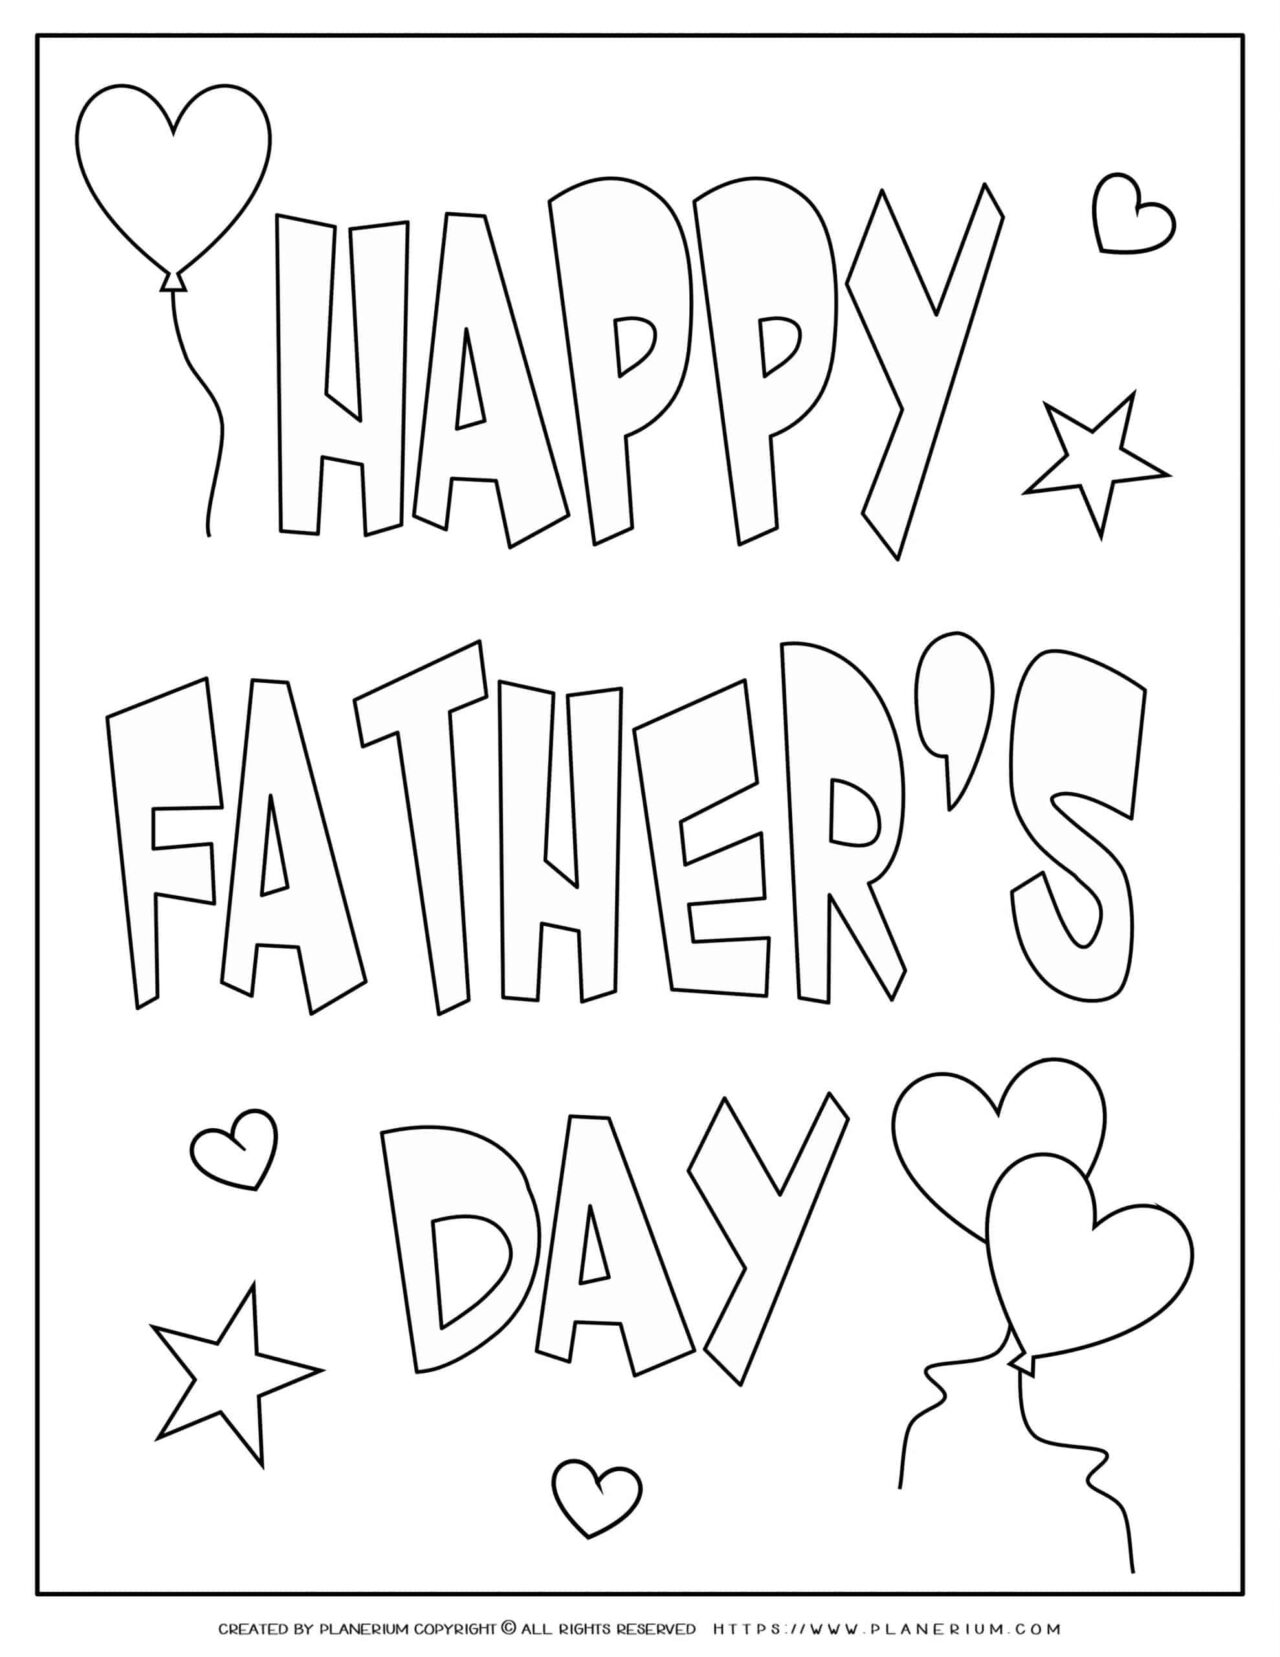 Father's Day - Coloring Page - Happy Father's Day